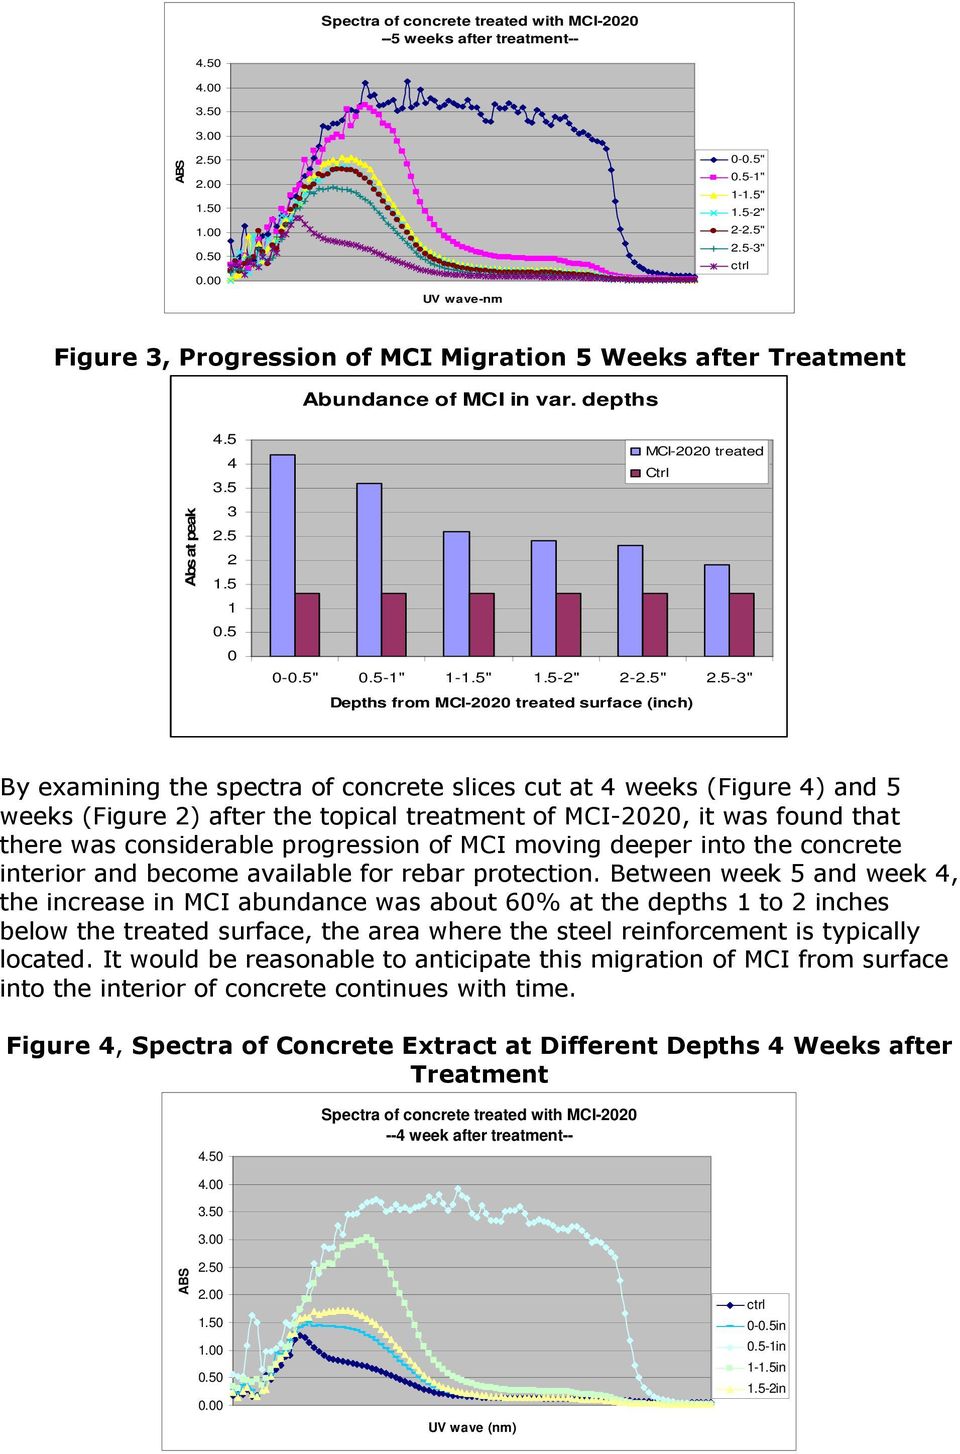 5-3" Depths from MCI-22 treated surface (inch) By examining the spectra of concrete slices cut at 4 weeks (Figure 4) and 5 weeks (Figure 2) after the topical treatment of MCI-22, it was found that